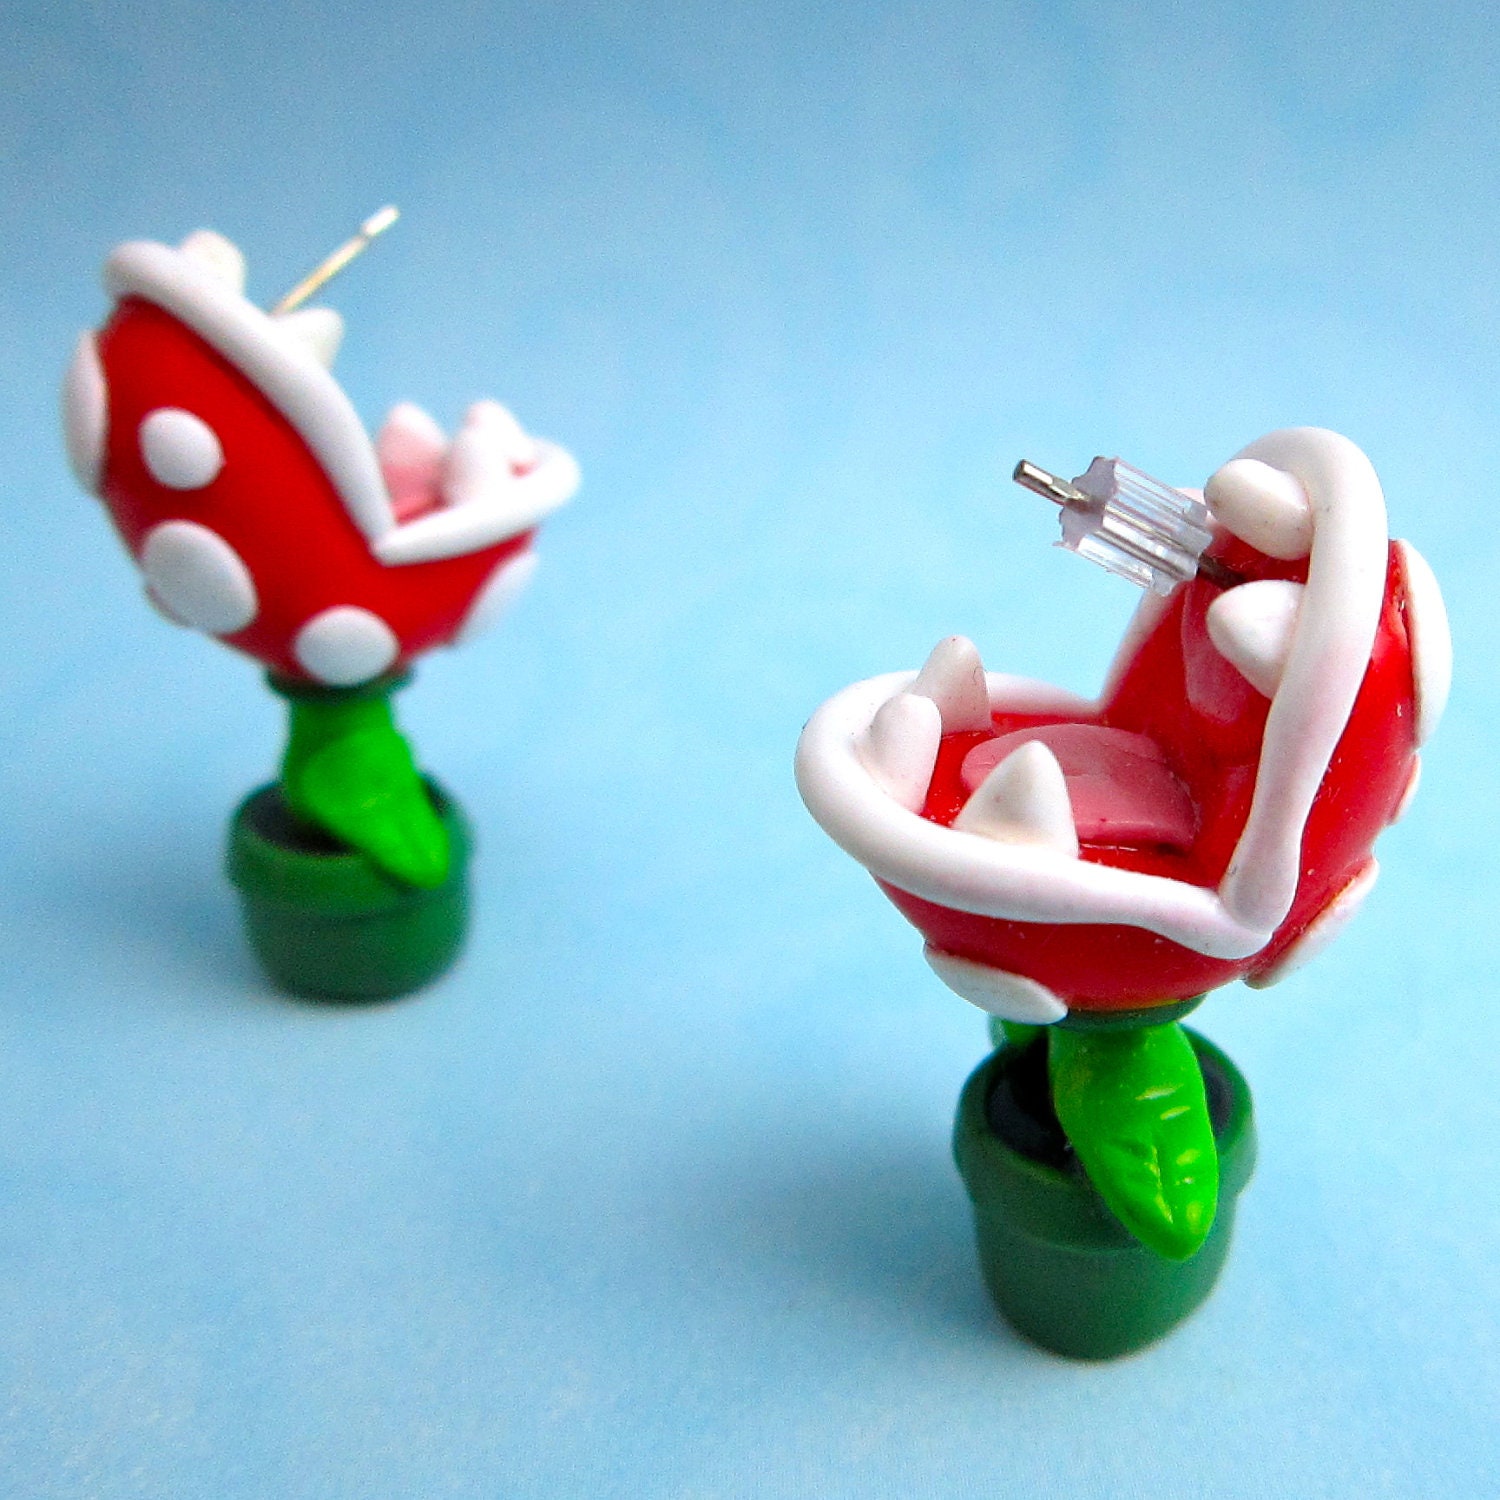 Piranha Plant earrings inspired from Mario Brothers